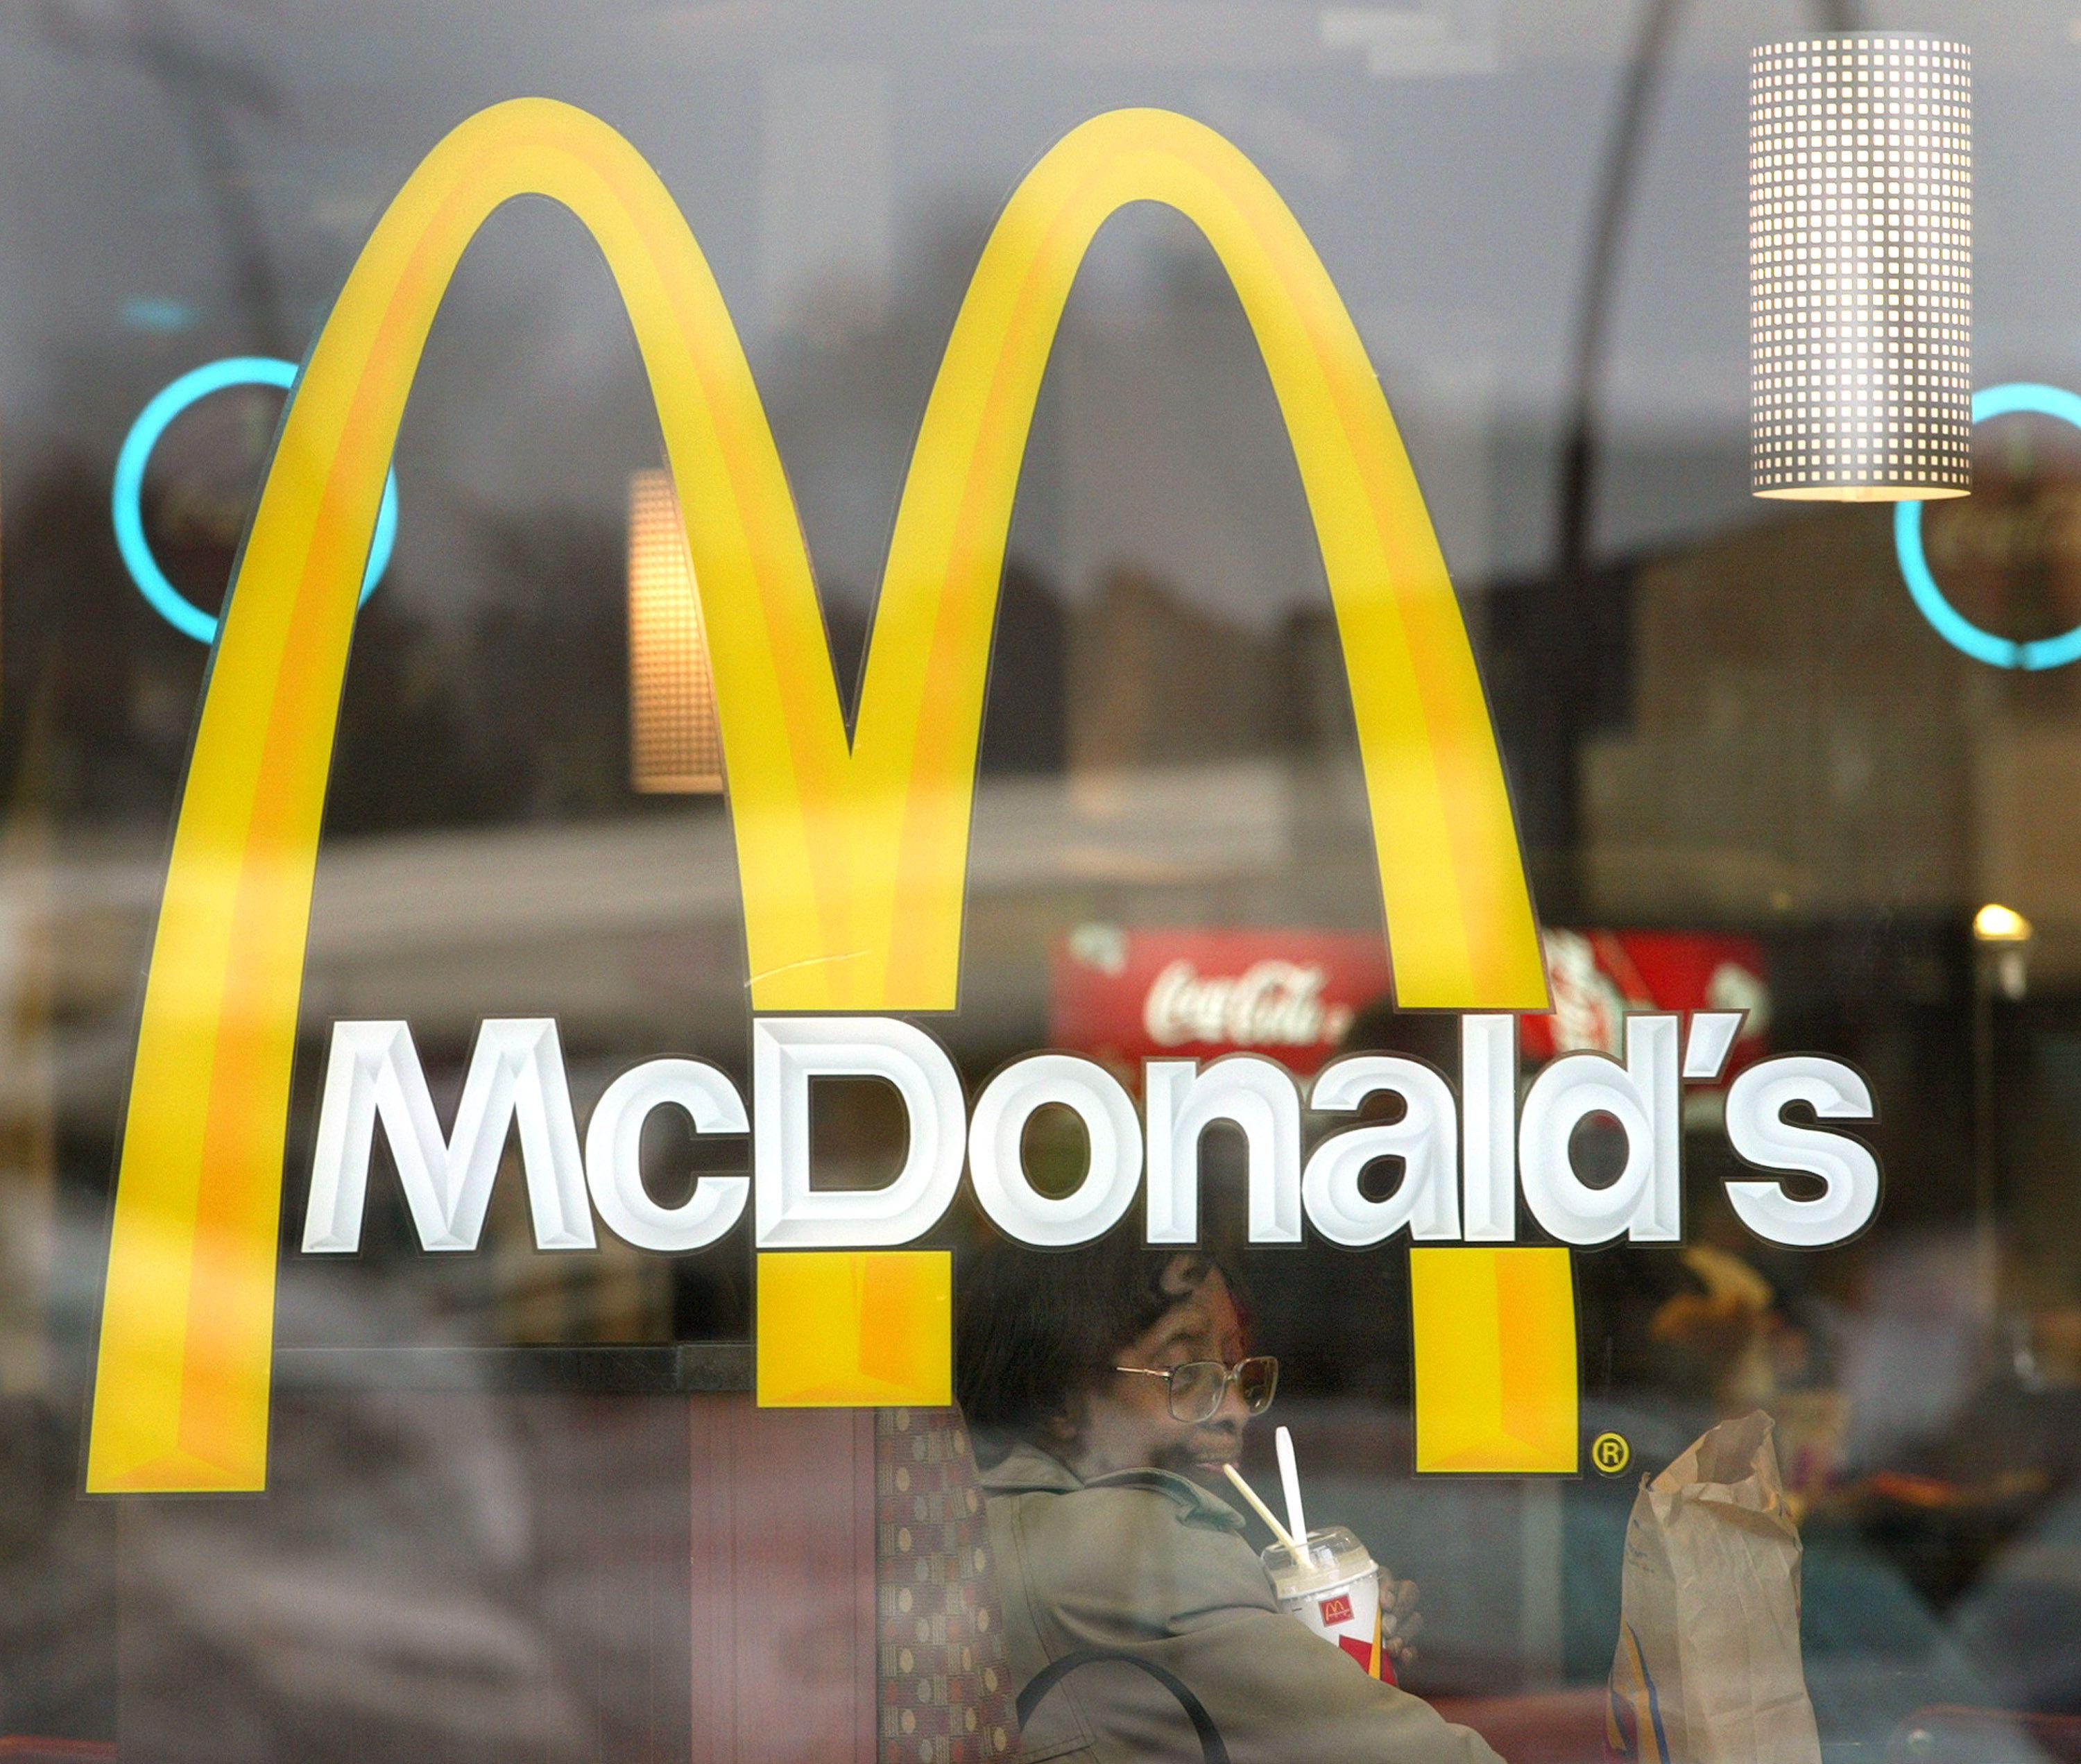 Chinese McDonald's Logo - McDonald's Edging Out KFC, Pizza Hut in China Revival Battle